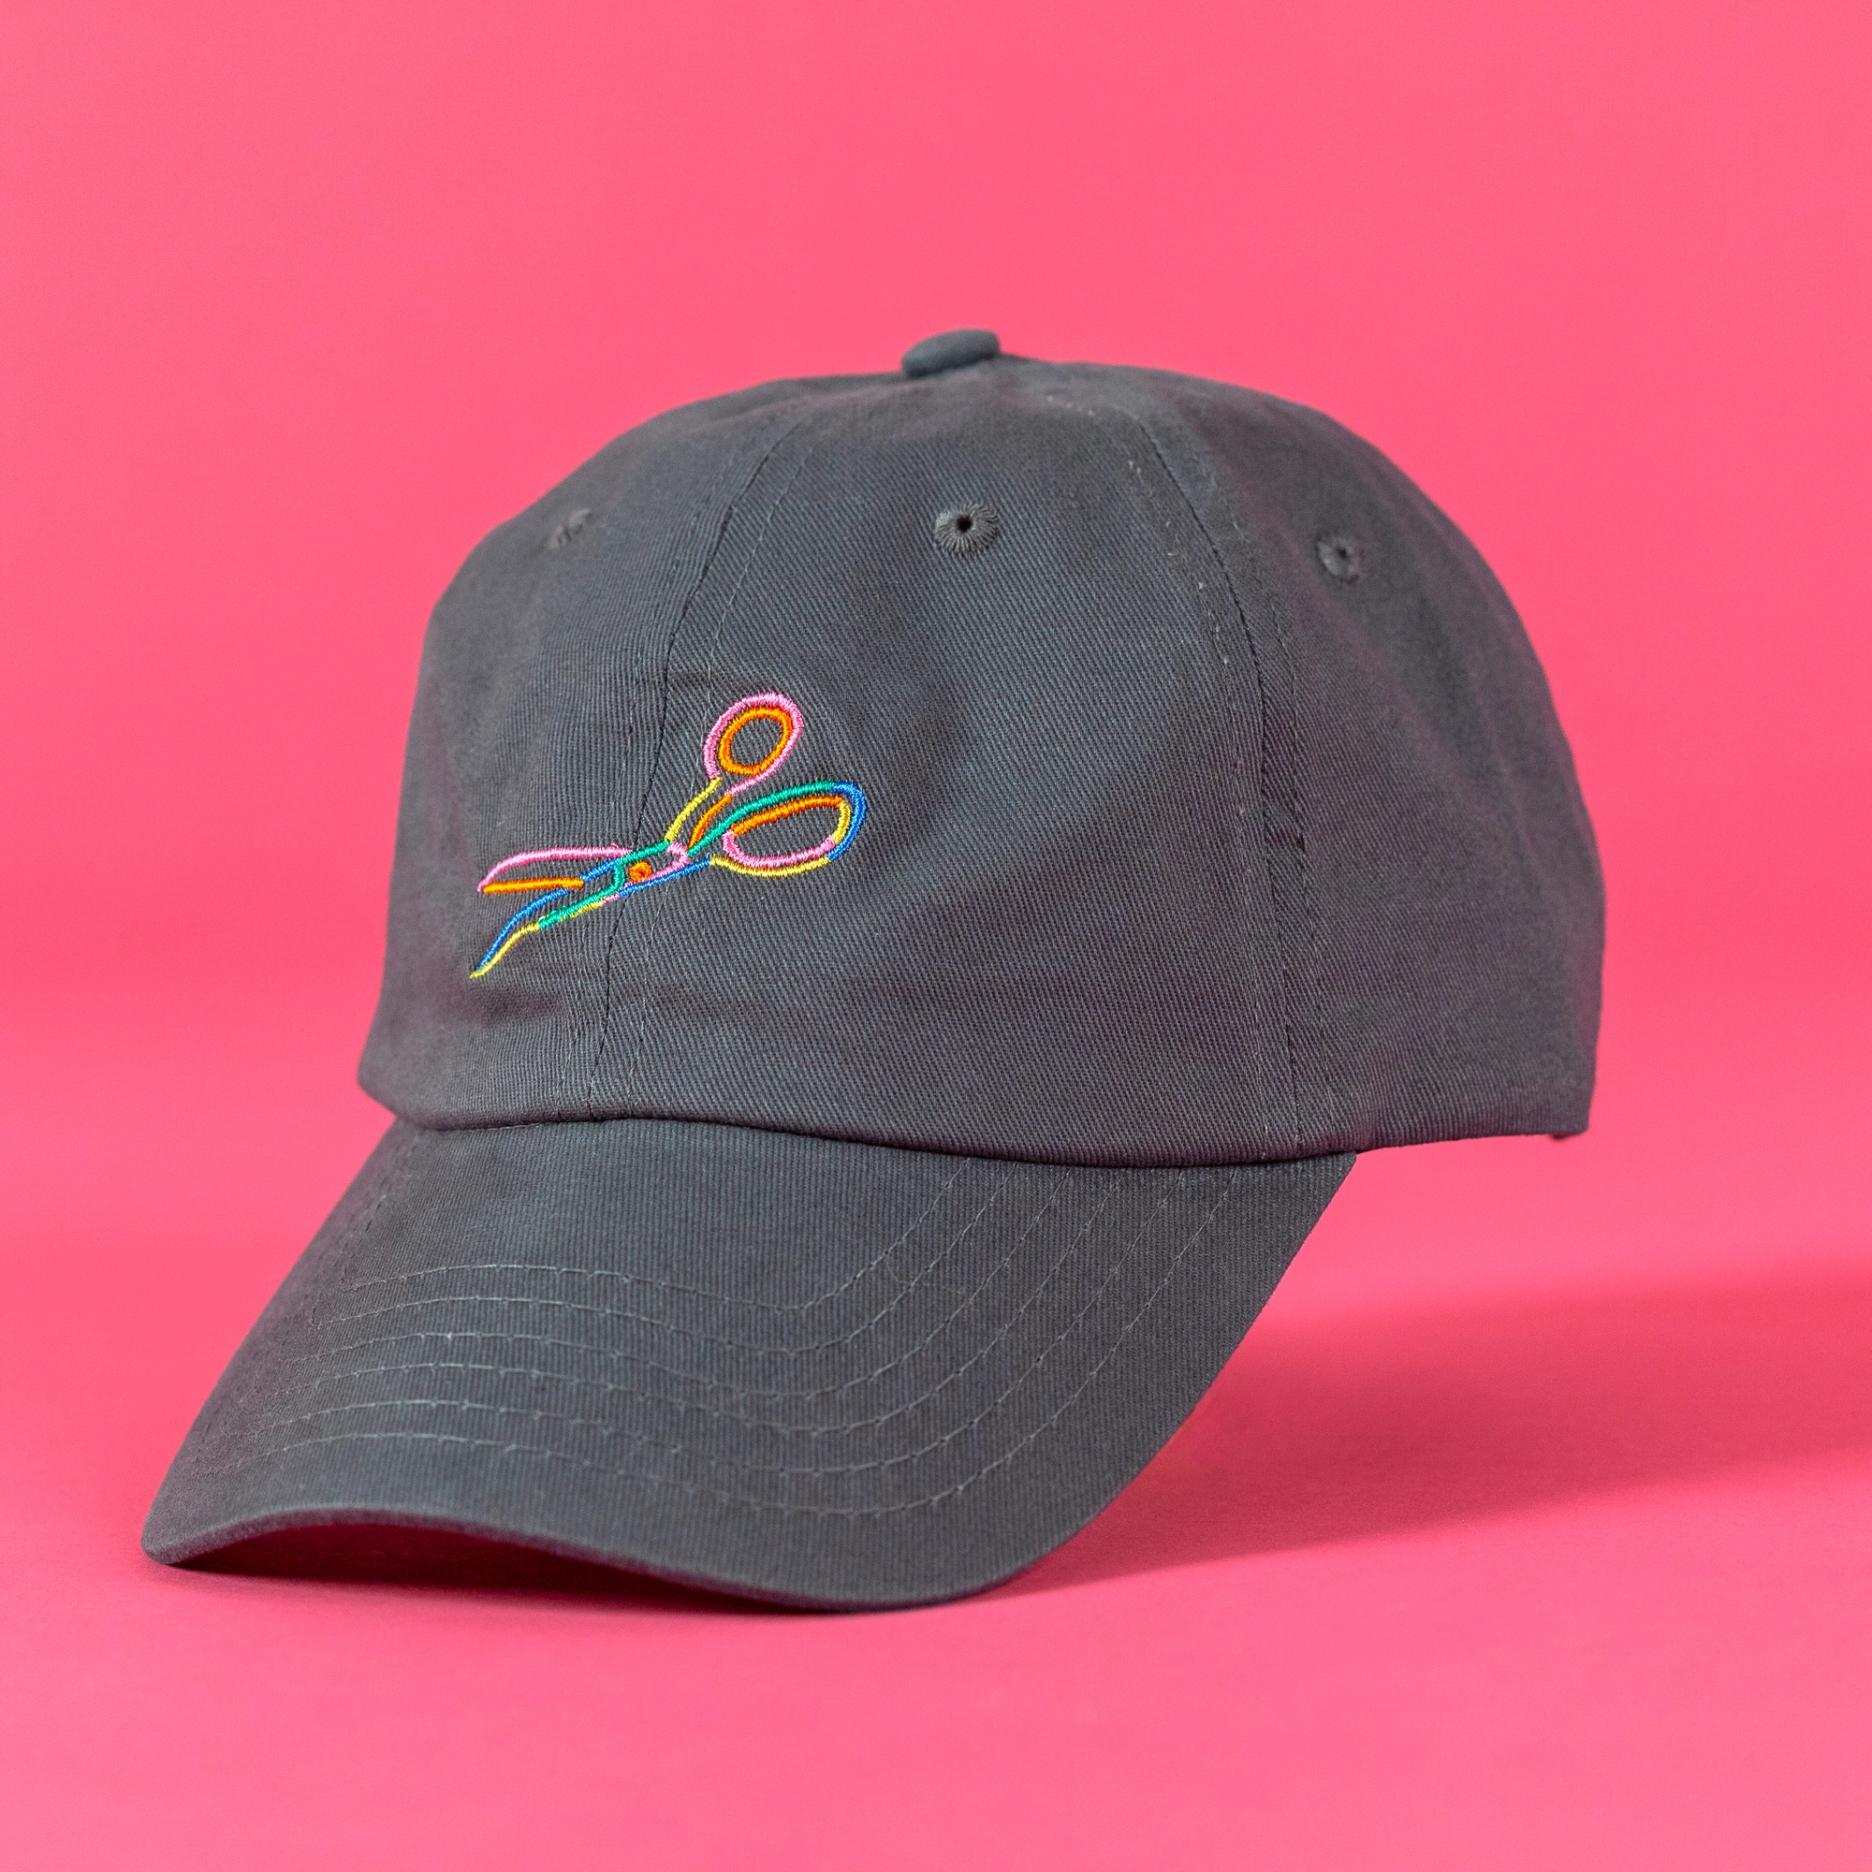 A grey baseball cap against a bright pink background. The cap is at a three quarter angle and looks as though it is floating. On the front of it, an illustrated pair of open scissors is embroidered in yellow, orange, blue, green, and pink embroidery threads.  